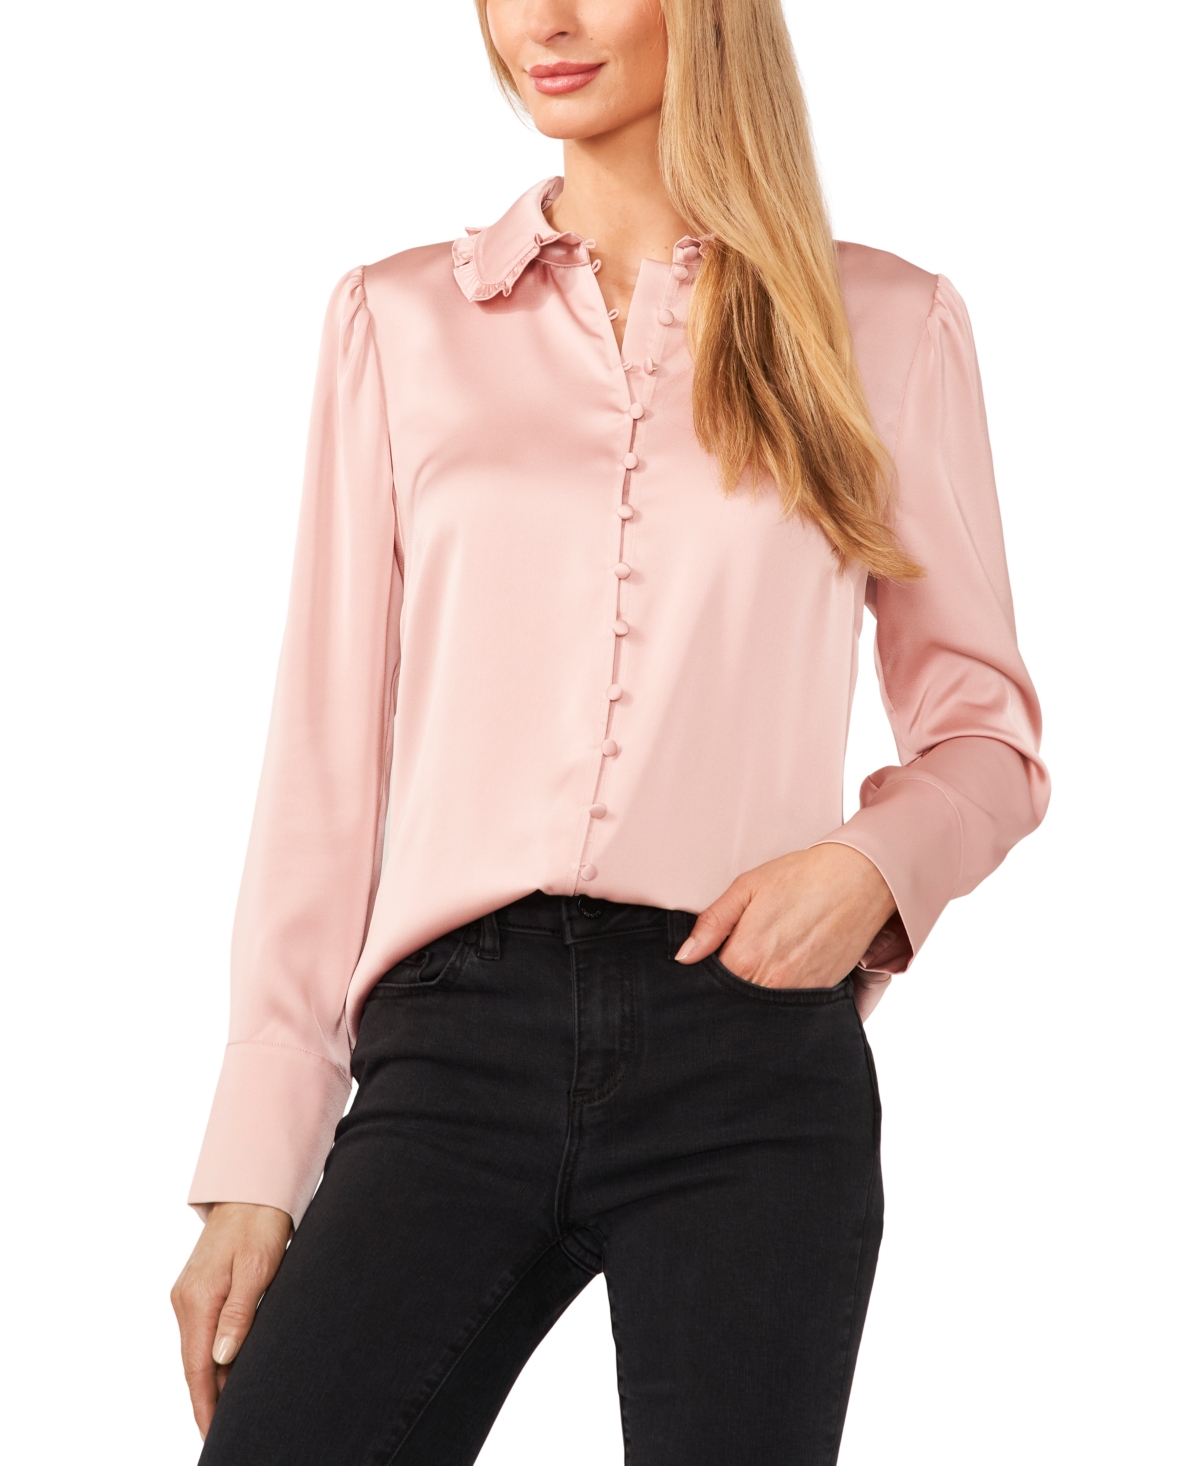 1930s Style Blouses, Shirts, Tops | Vintage Blouses CeCe Womens Ruffle-Collar Button-Front Blouse - Misty Pink $50.56 AT vintagedancer.com